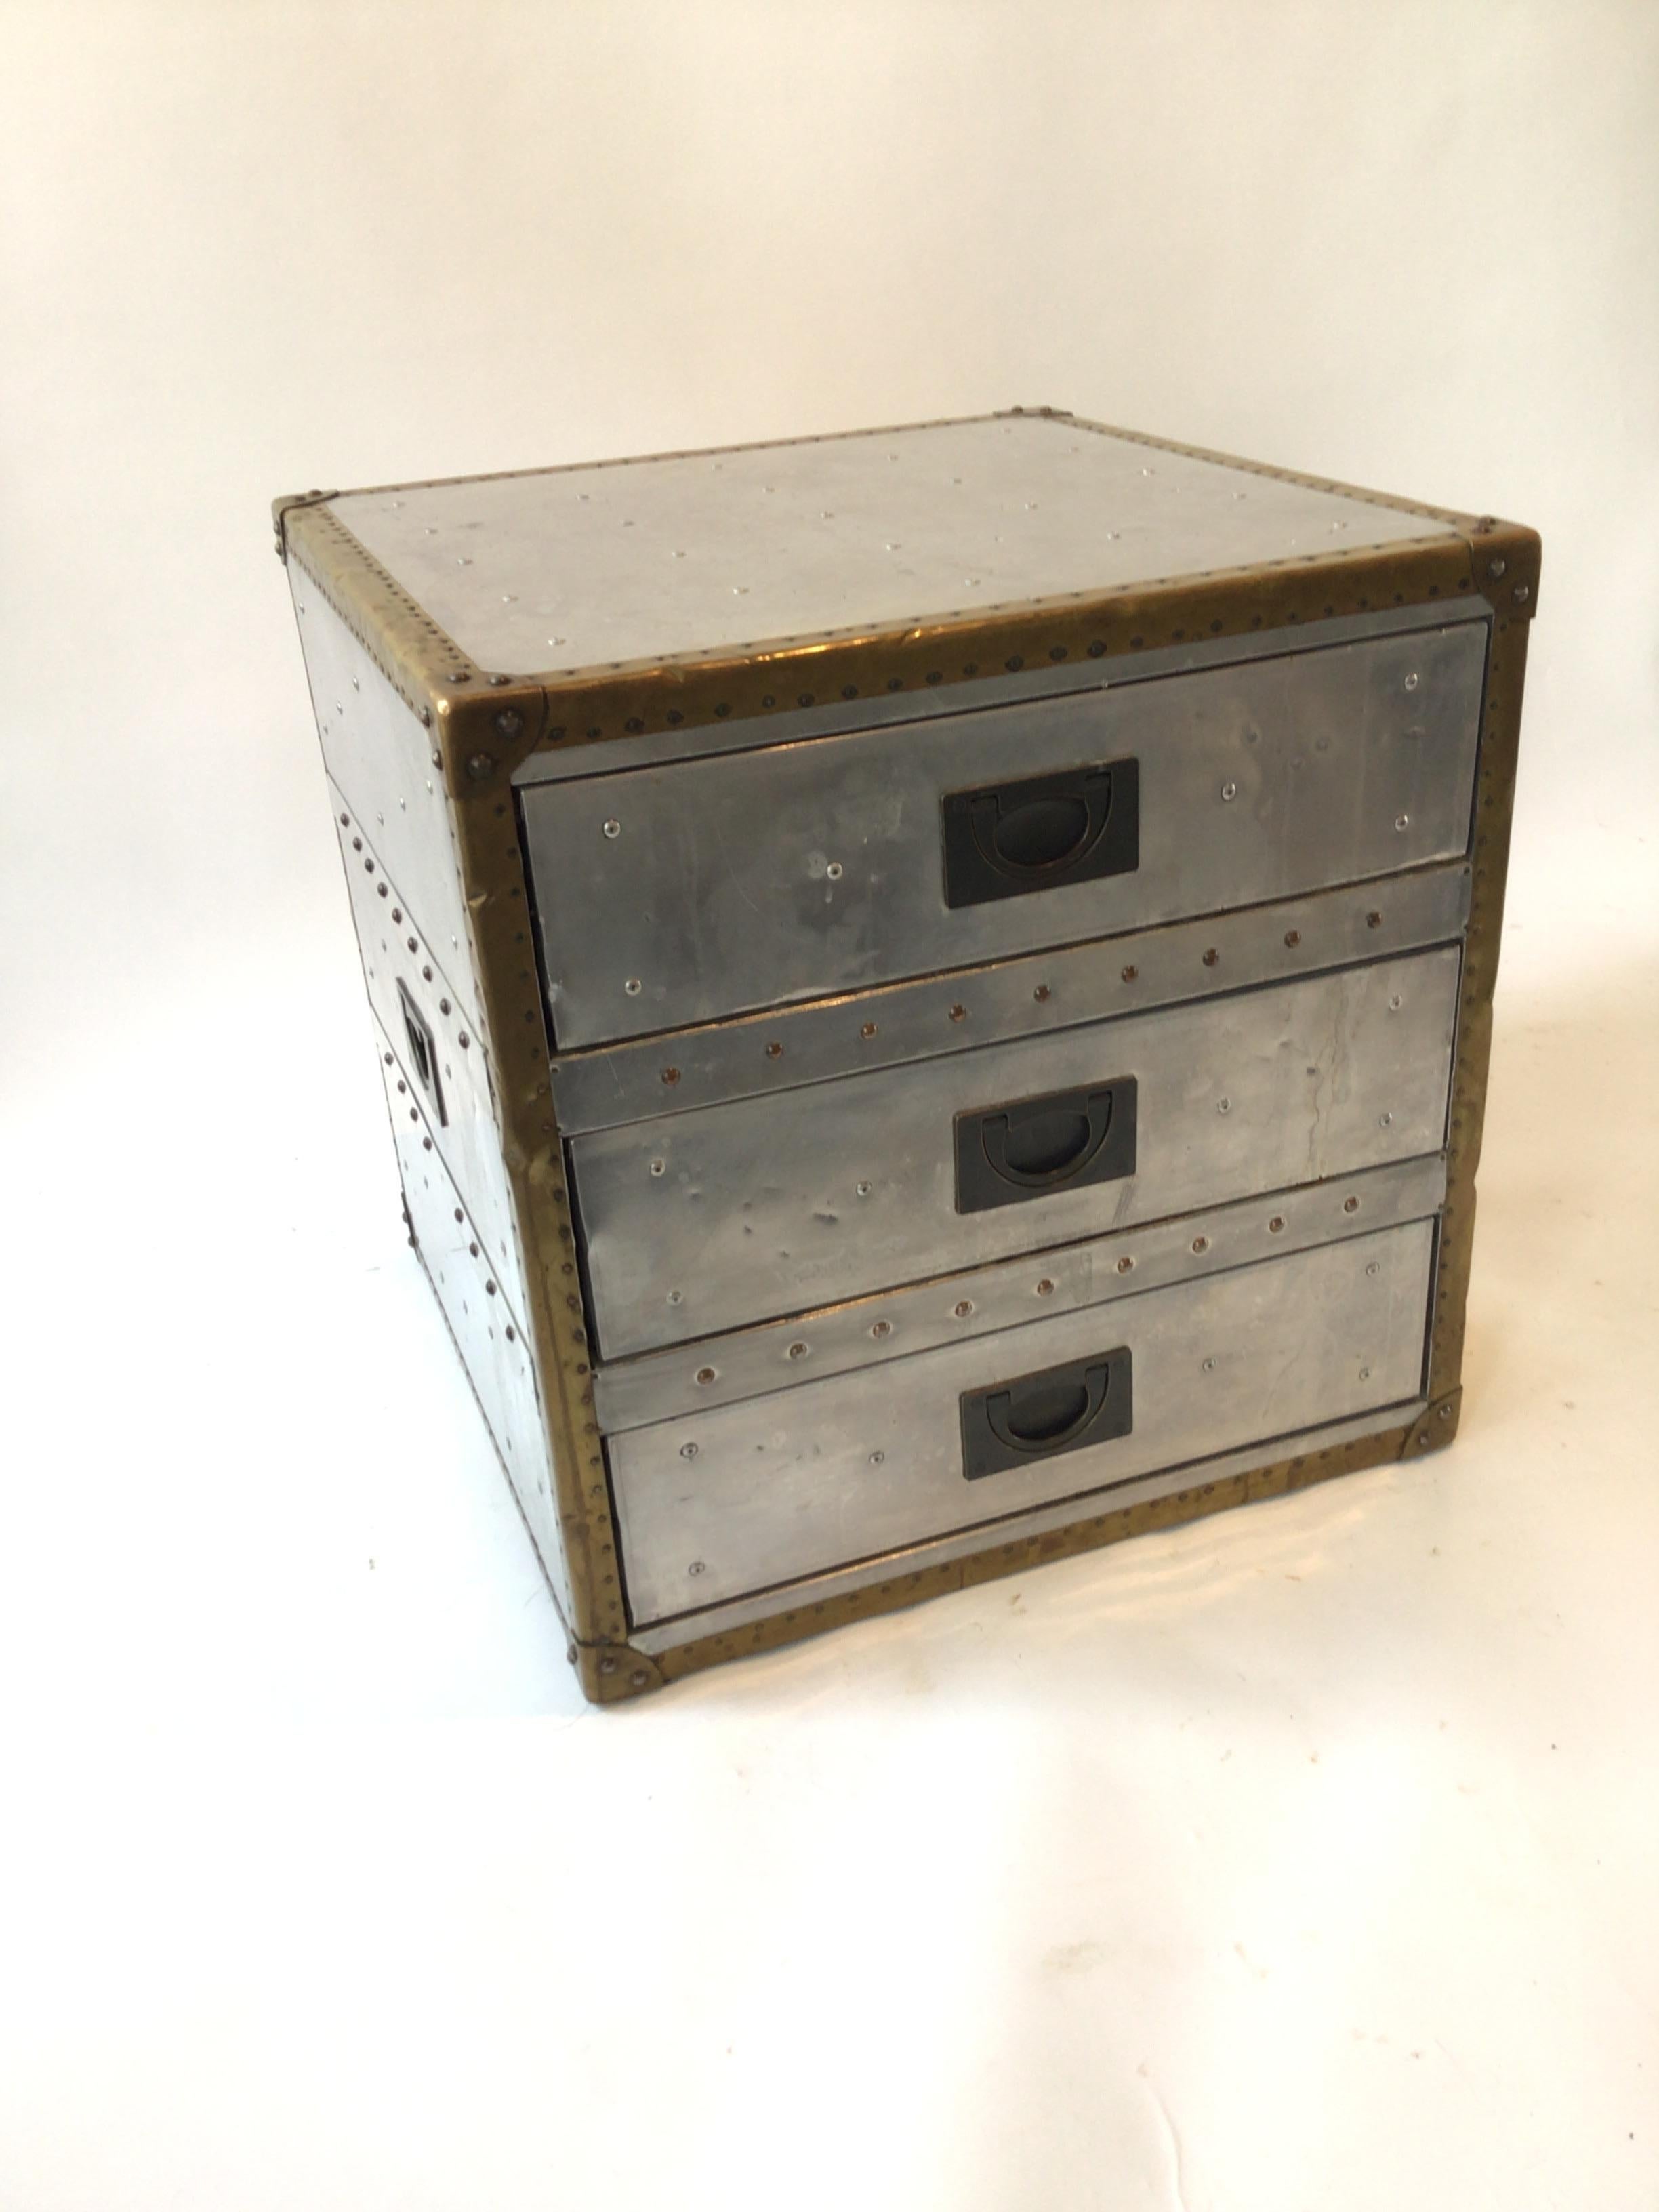 Restoration hardware metal campaign style end table.